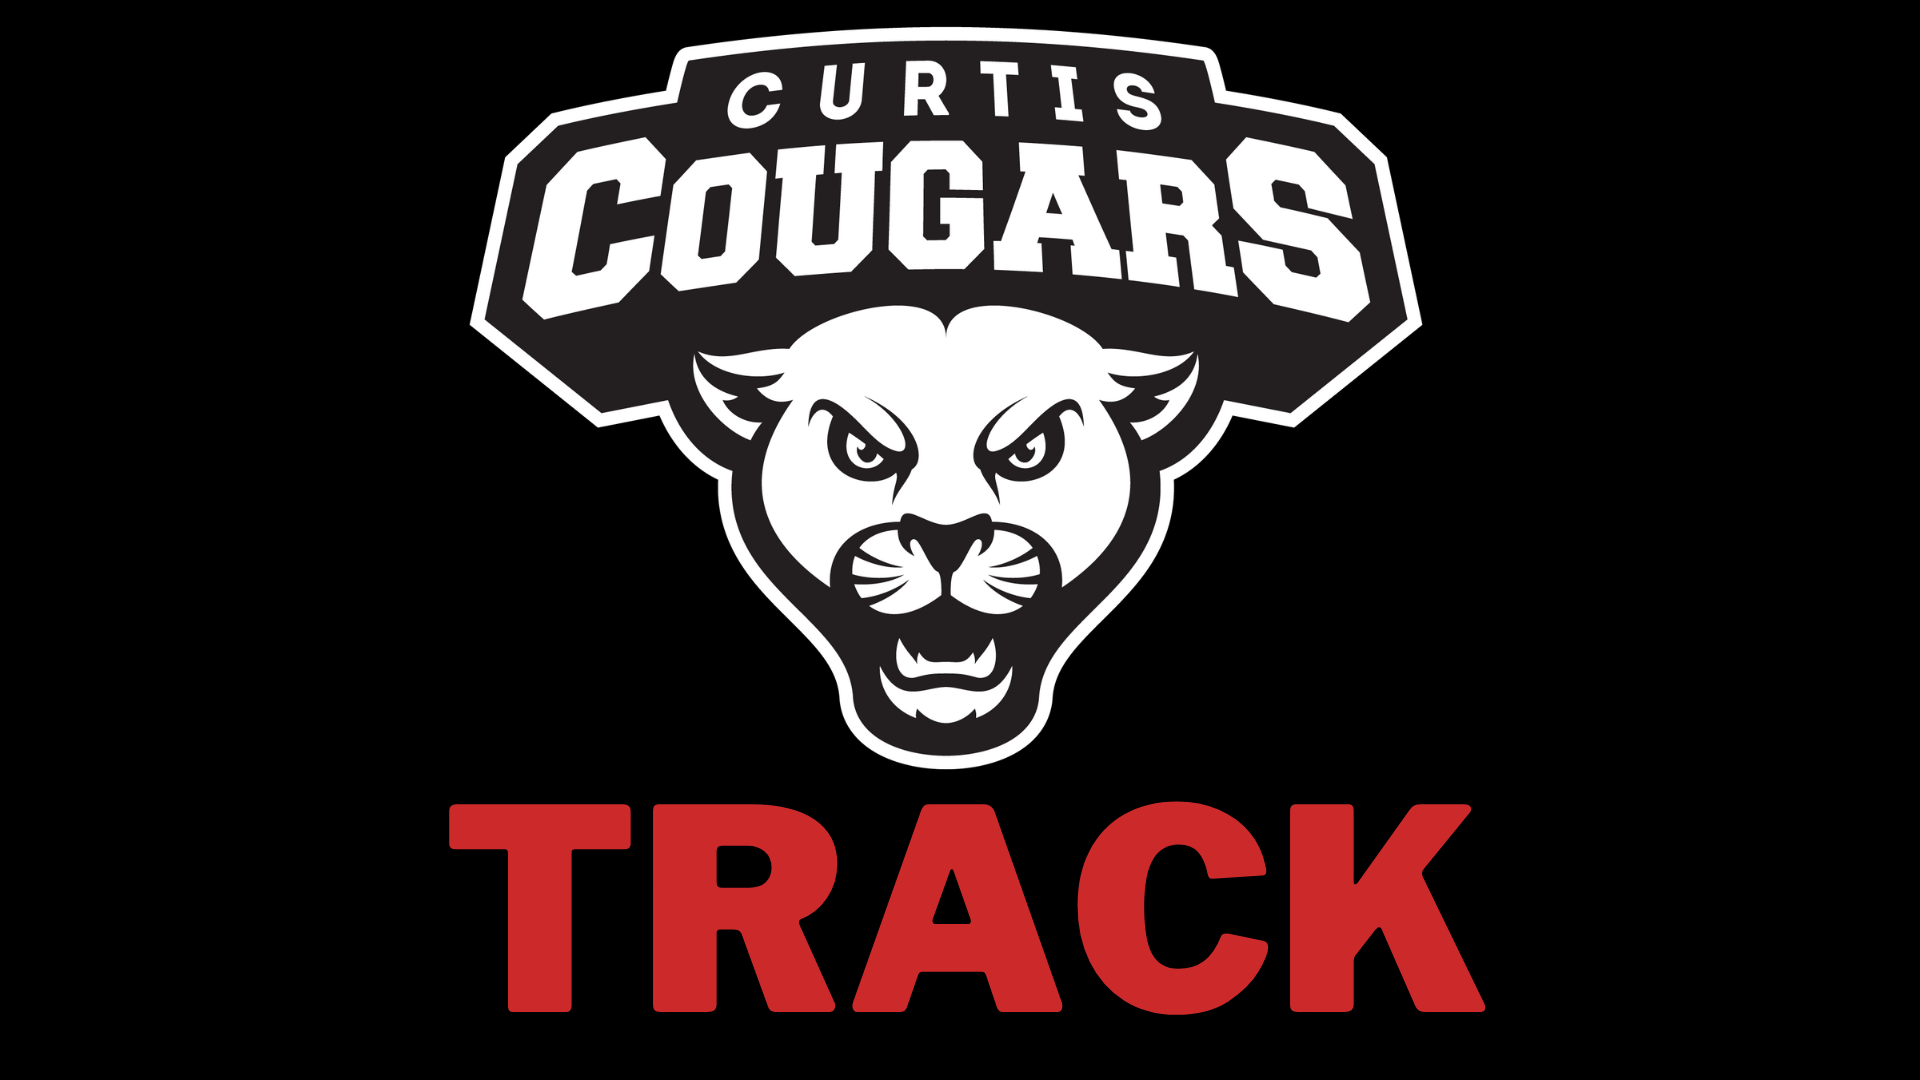 Curtis Cougars Track